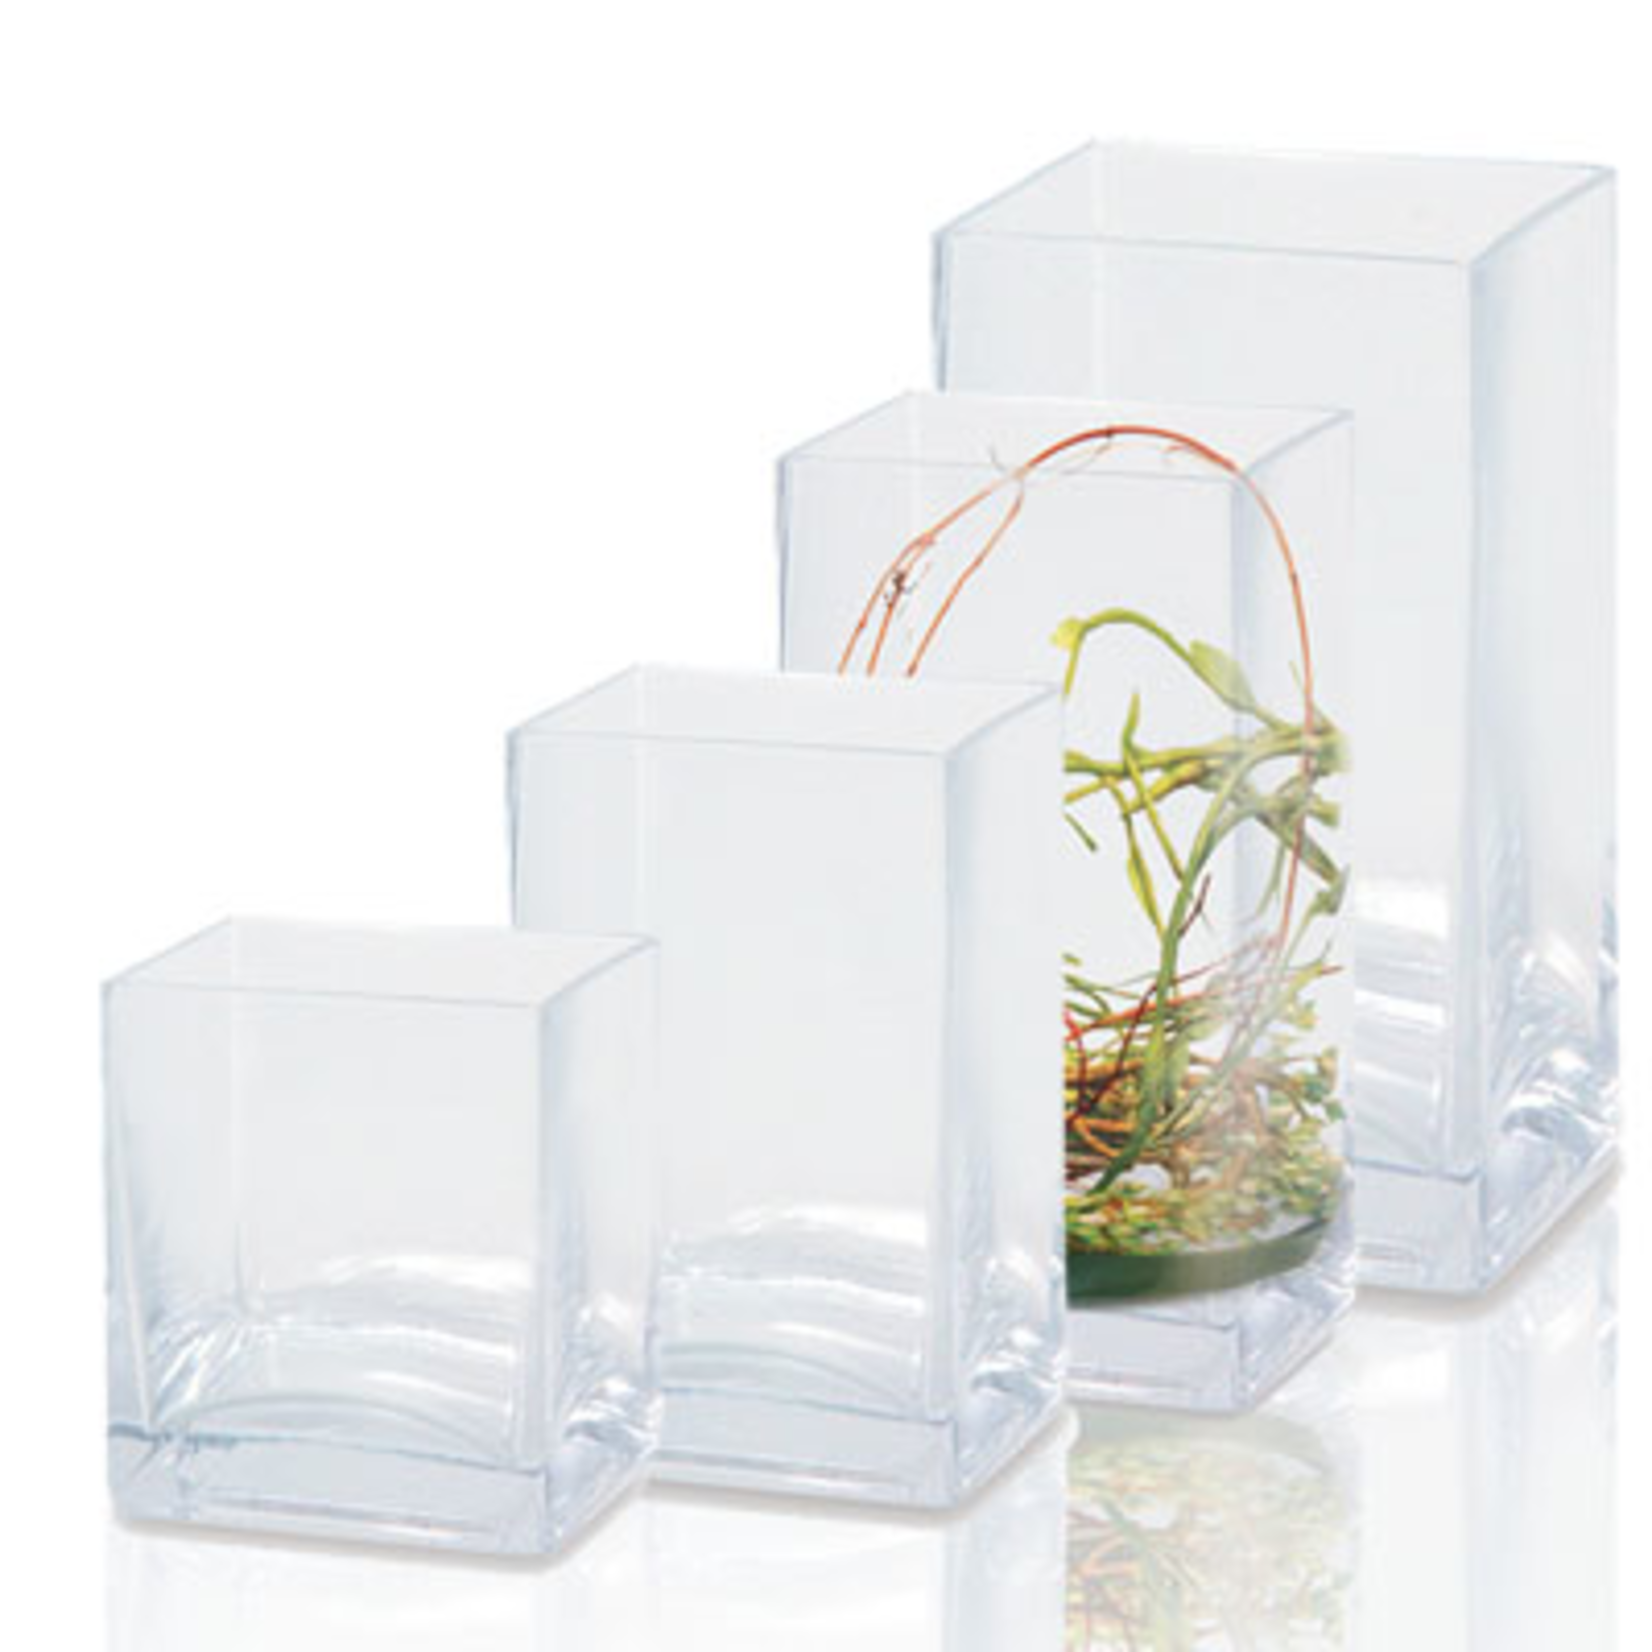 6"H X 6" X 4" CLEAR GLASS RECTANGLE CASE